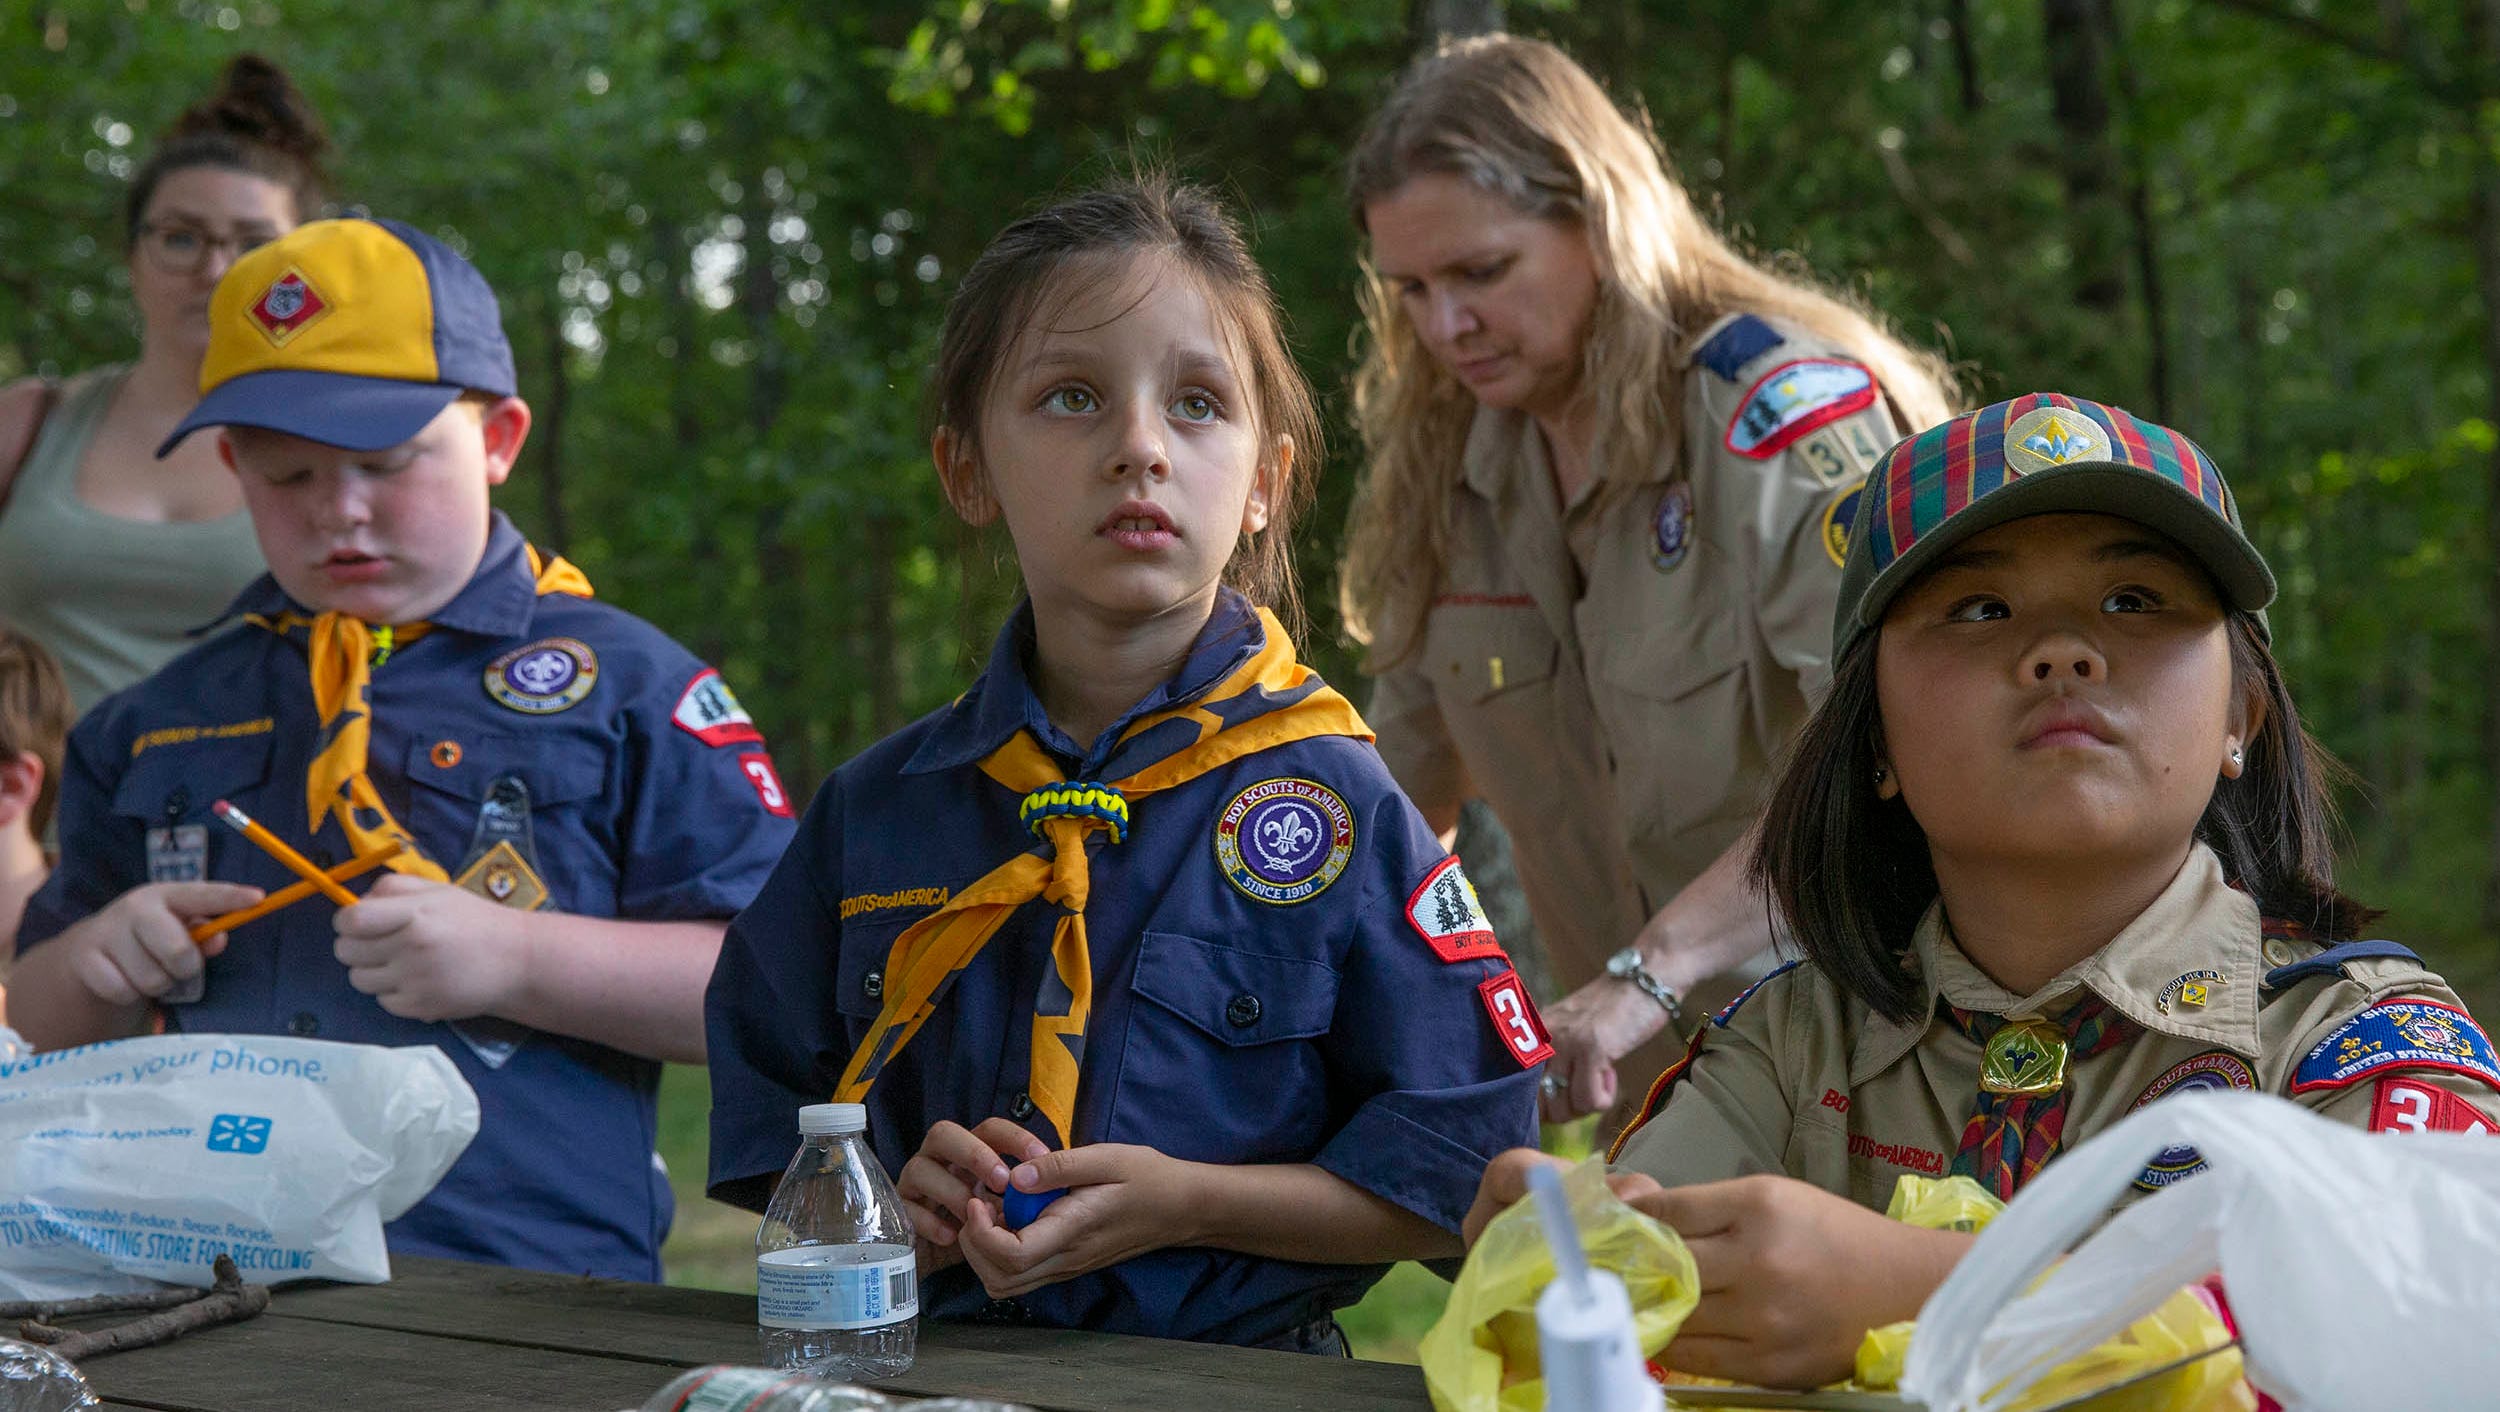 do-you-support-girls-in-boy-scouts-troops-or-boys-in-girl-scouts